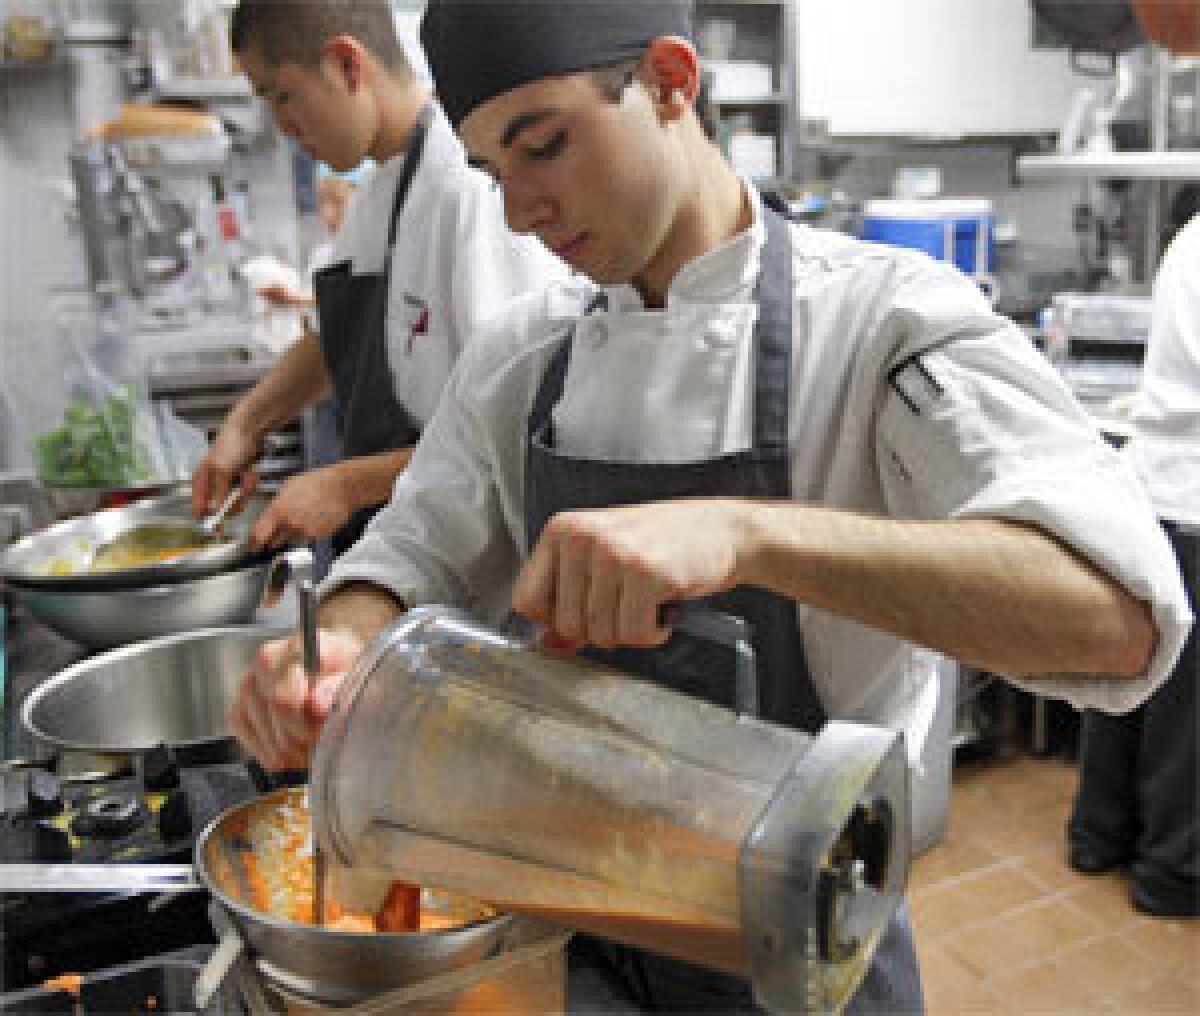 Jacob Greenberg works as a "stage" in the kitchen at the French restaurant Melisse in Santa Monica.